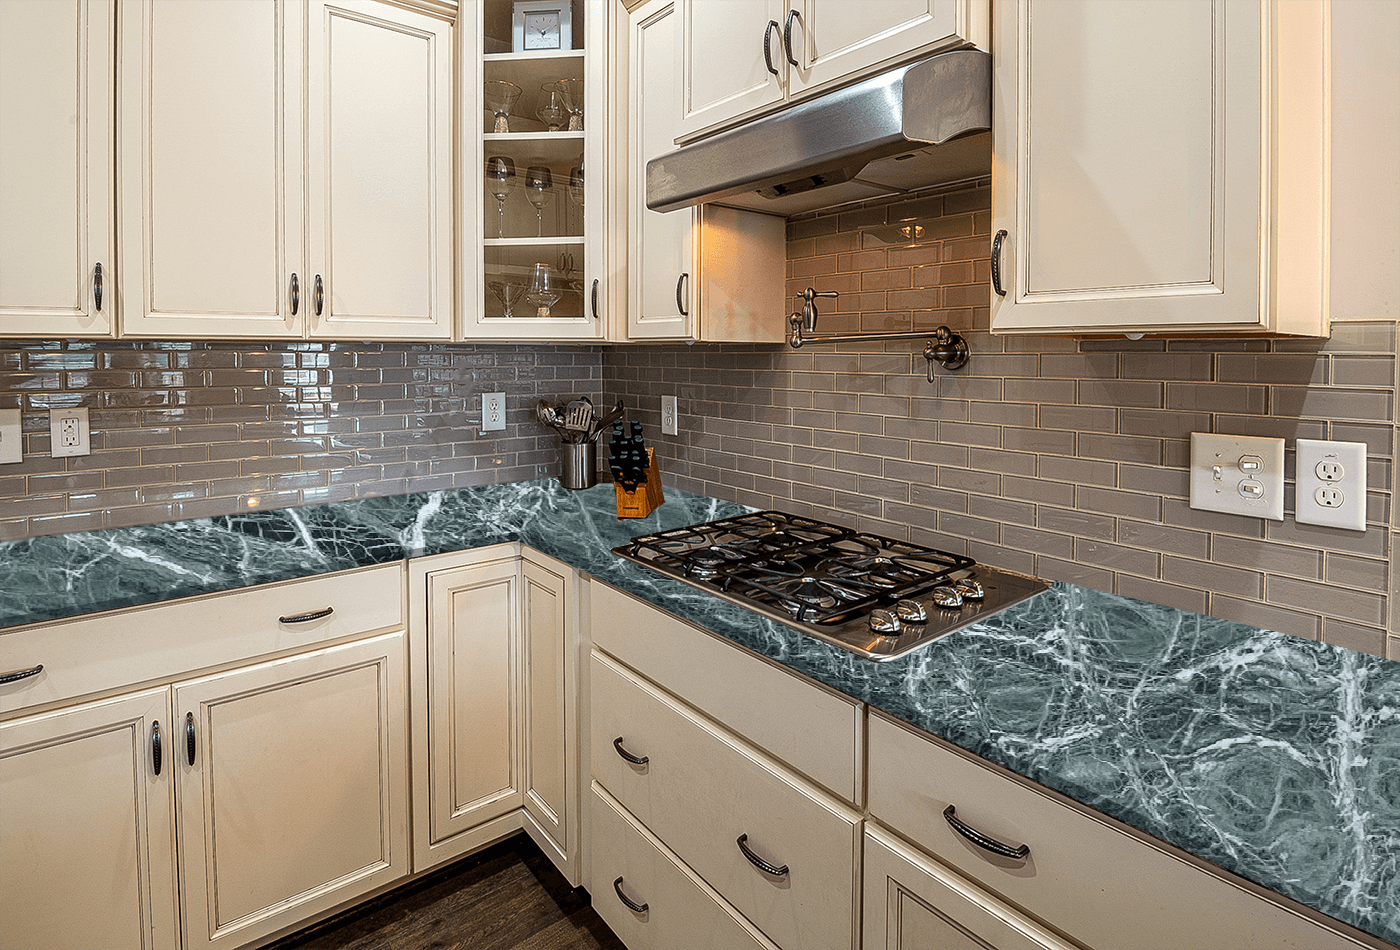 What Makes Granite an Excellent for Interiors